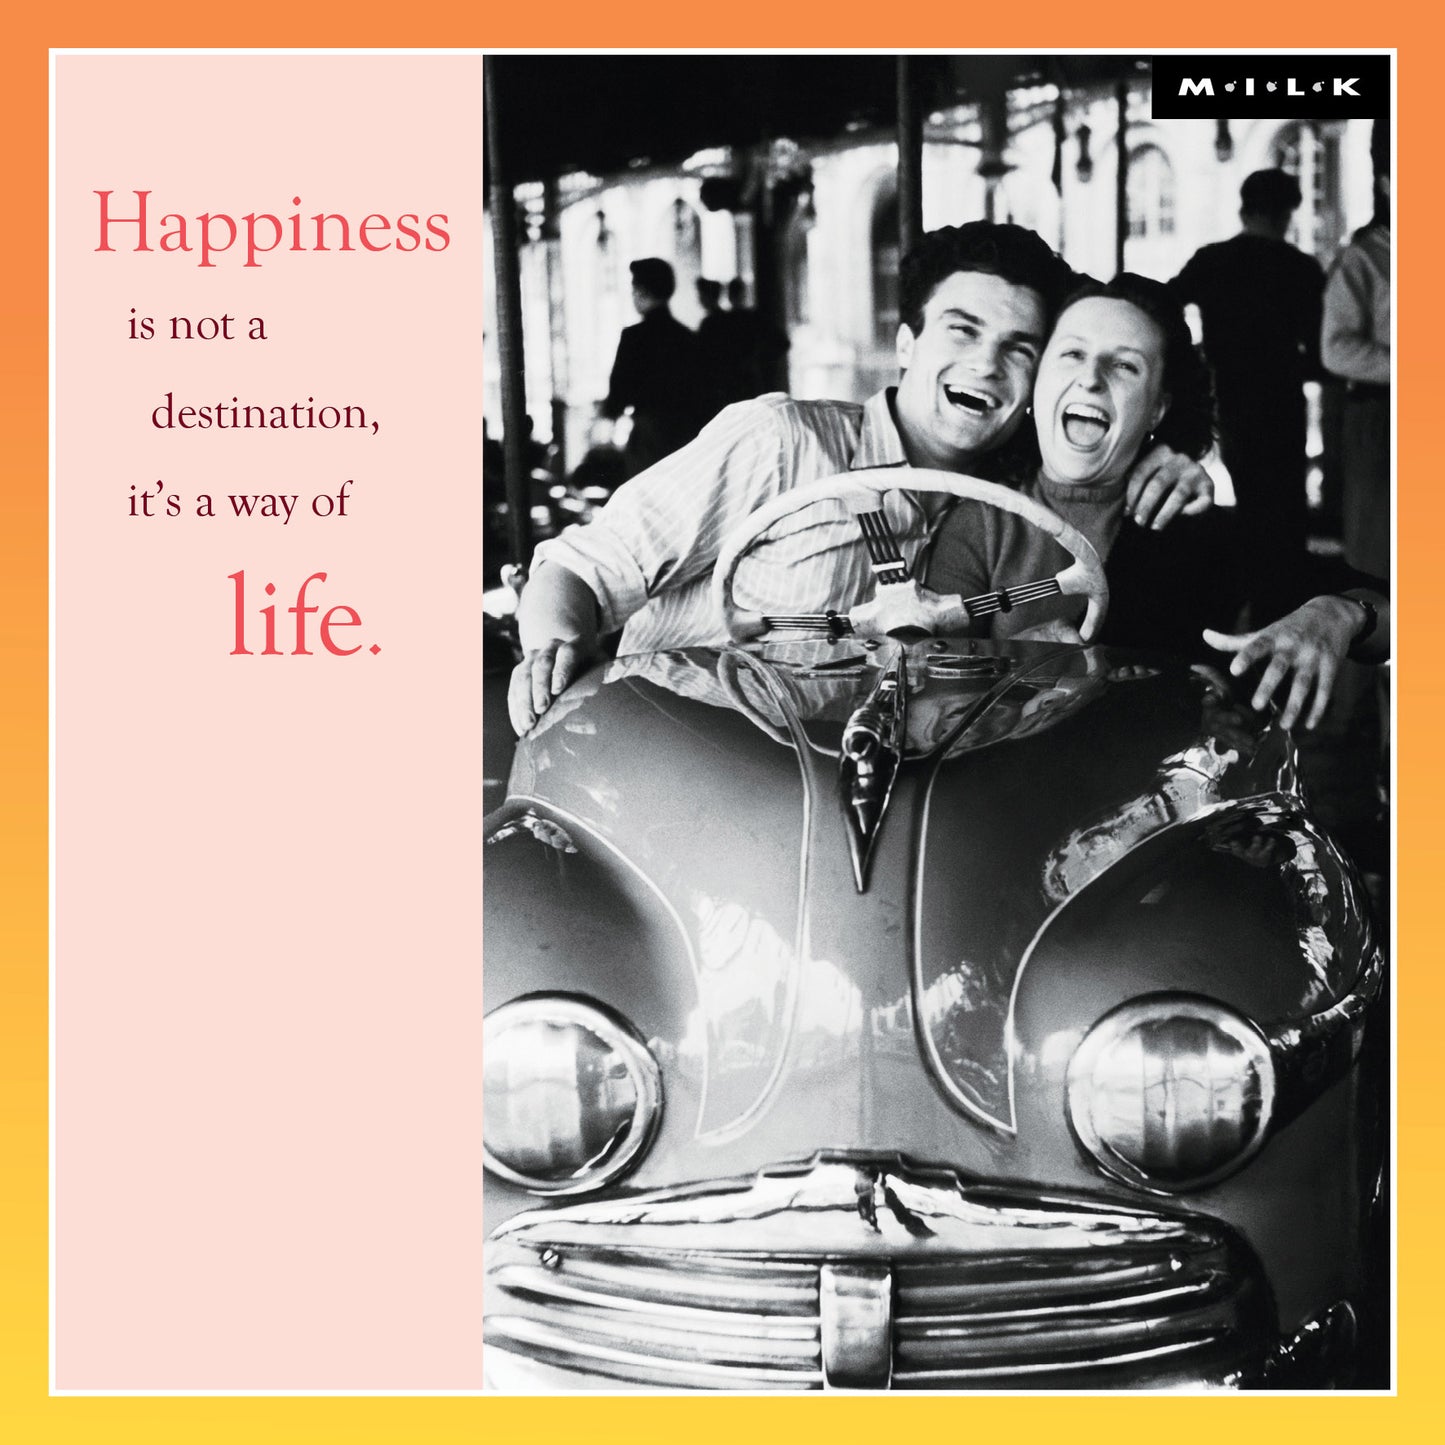 M.I.L.K Greeting Card "Happiness is not a destination"